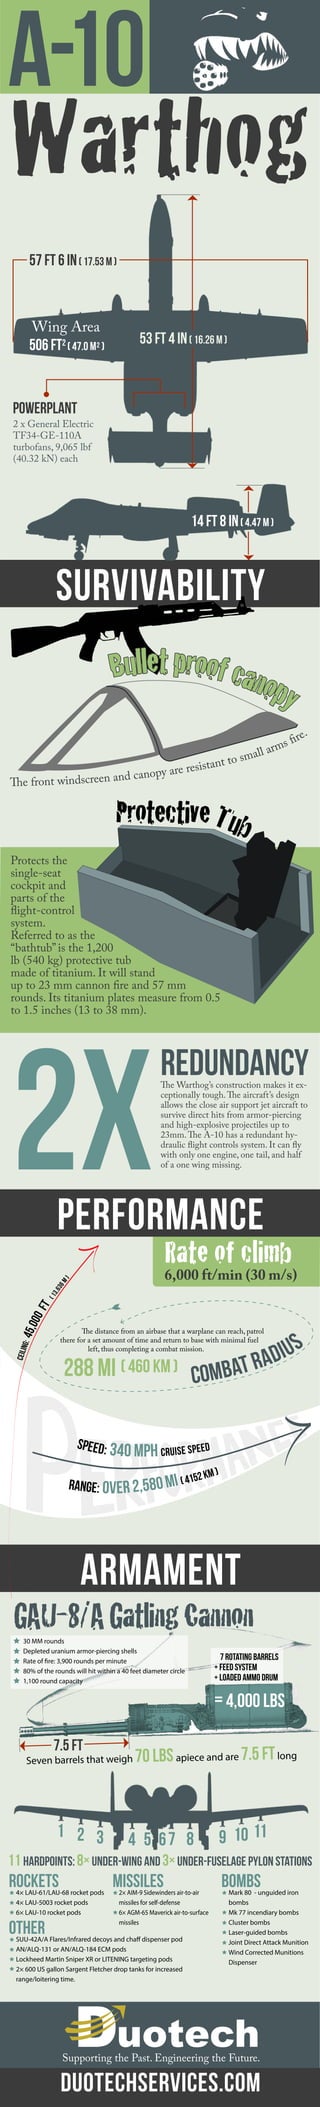 Facts About the A-10 Warthog Infographic